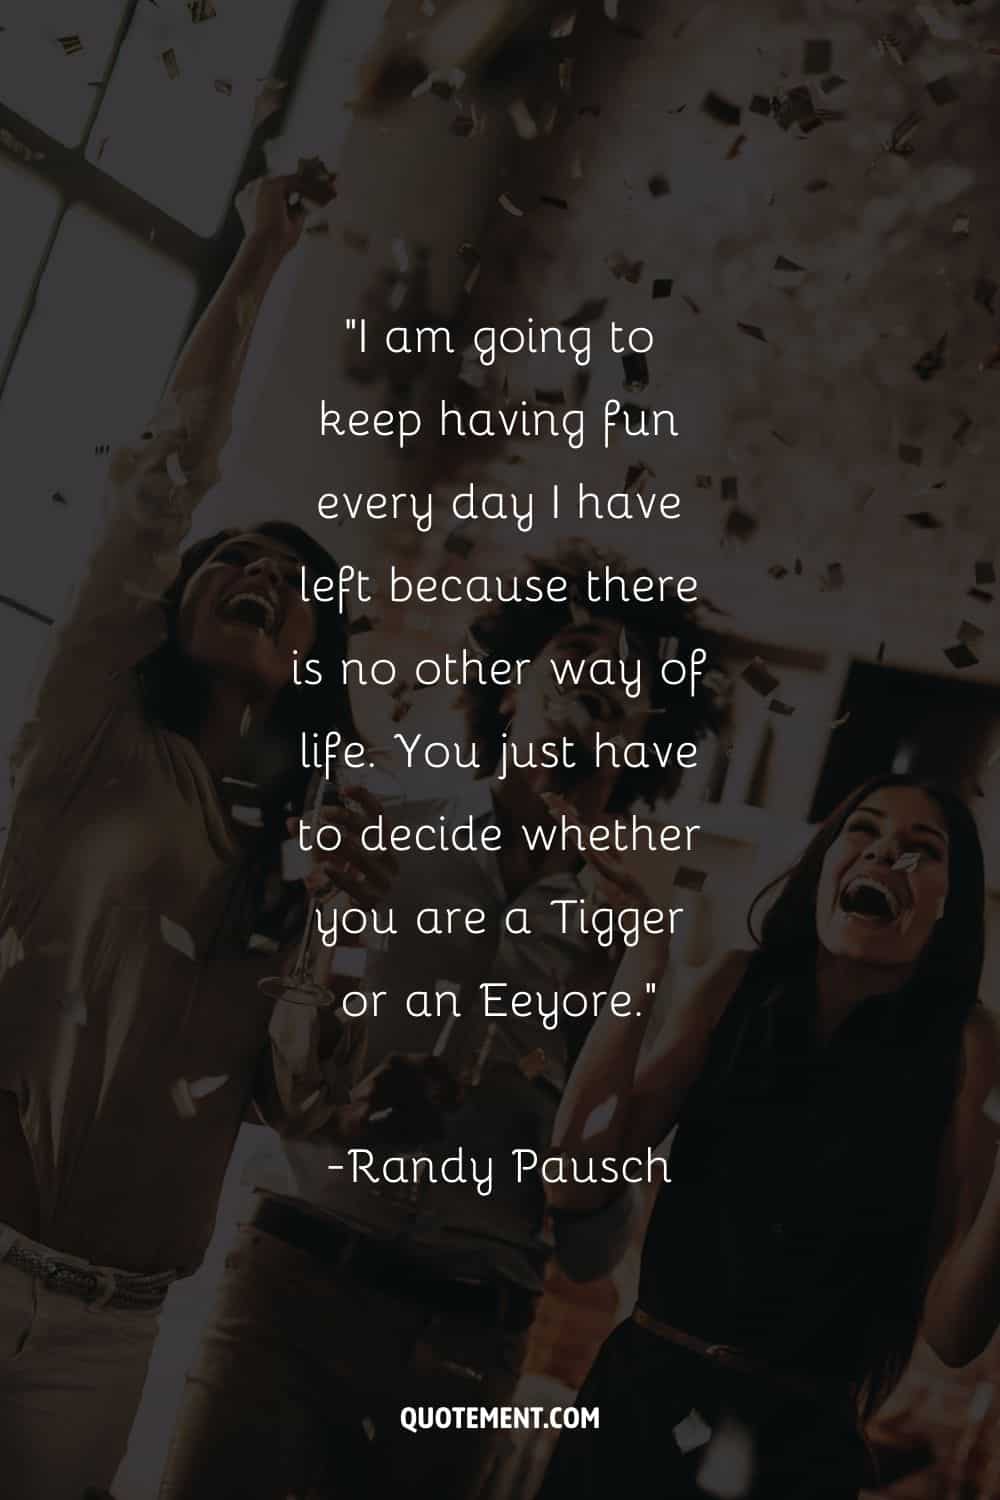 I am going to keep having fun every day I have left because there is no other way of life. You just have to decide whether you are a Tigger or an Eeyore. — Randy Pausch